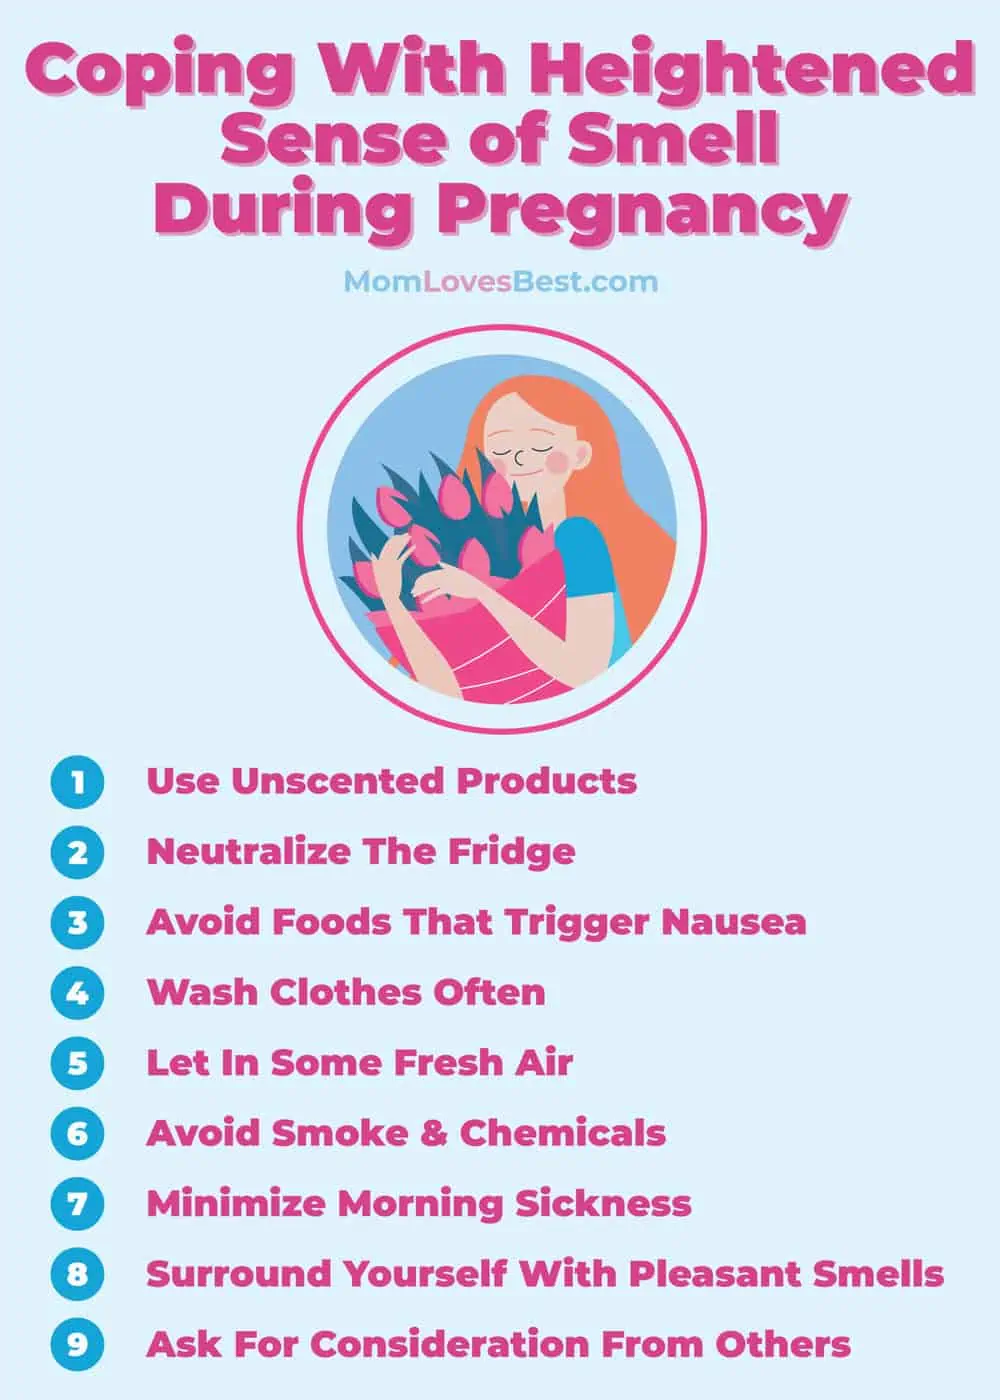 how to manage heightened sense of smell during pregnancy